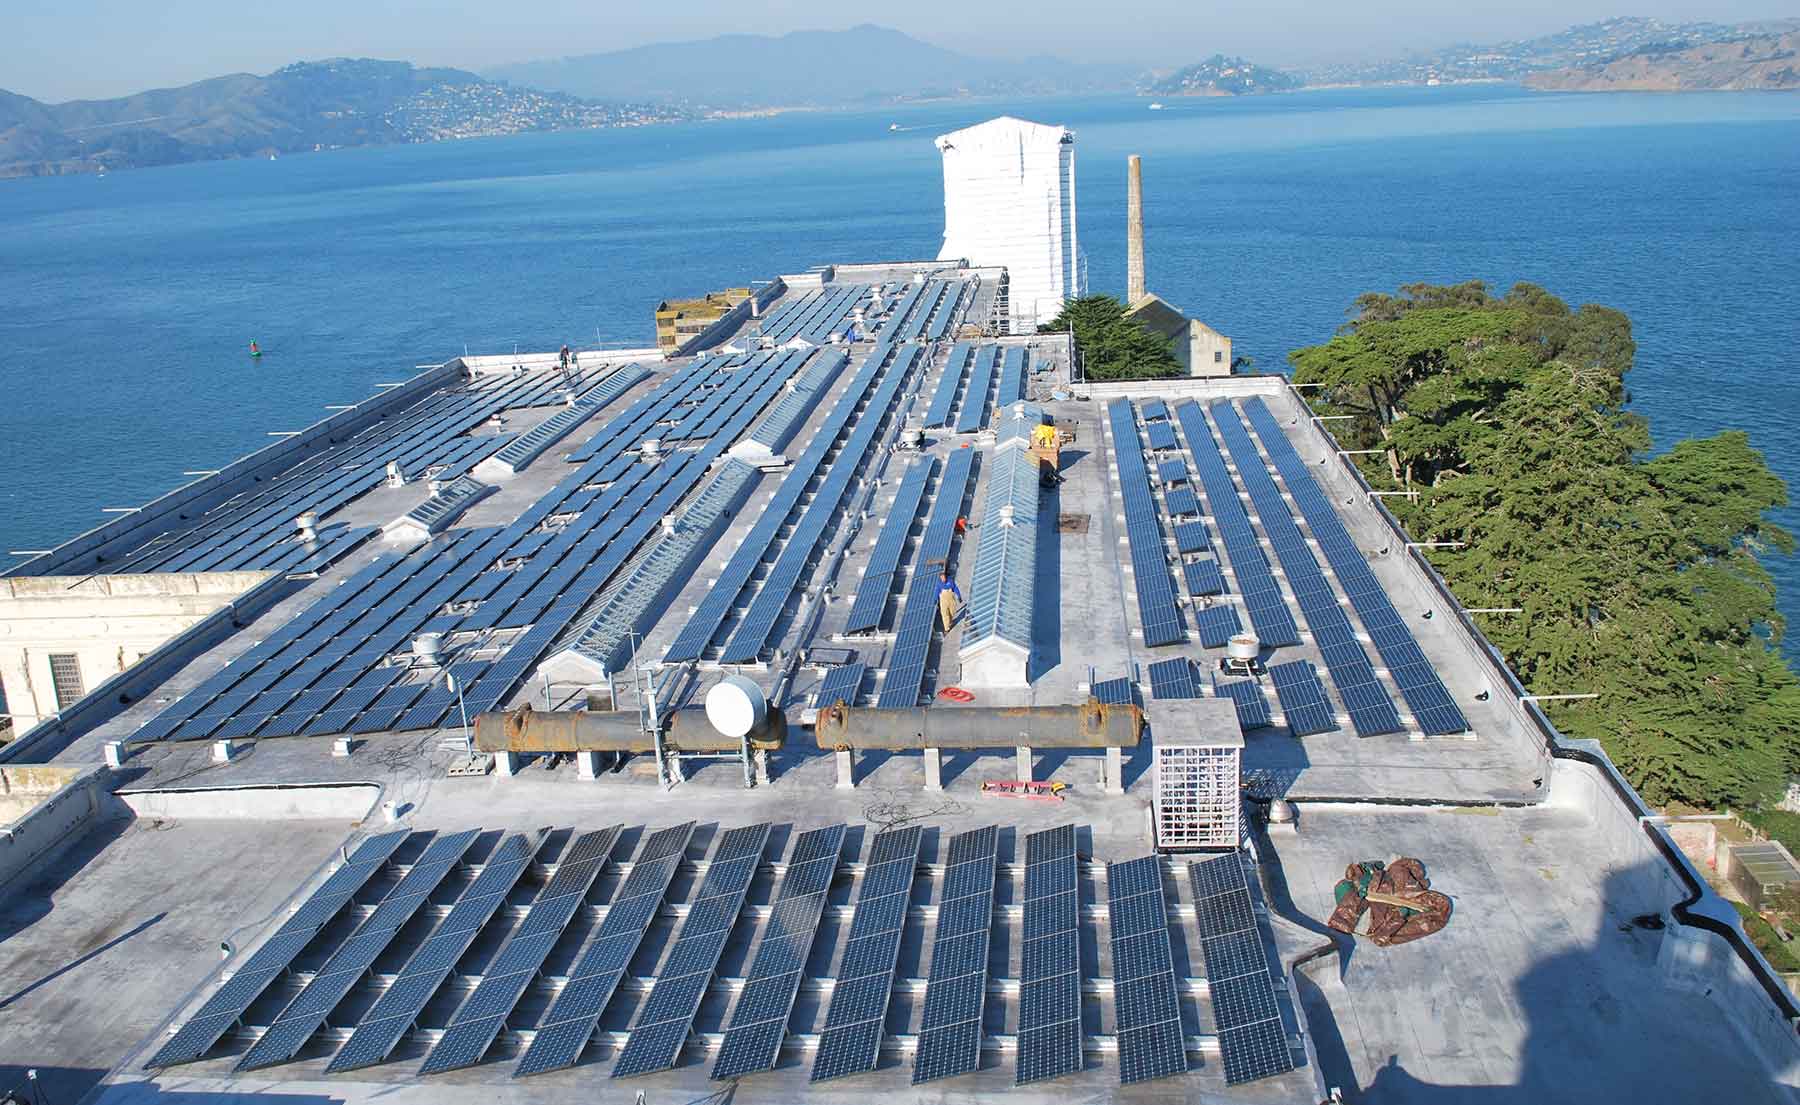 Photo of solar panels on the roof of Alcatraz's cellhouse building